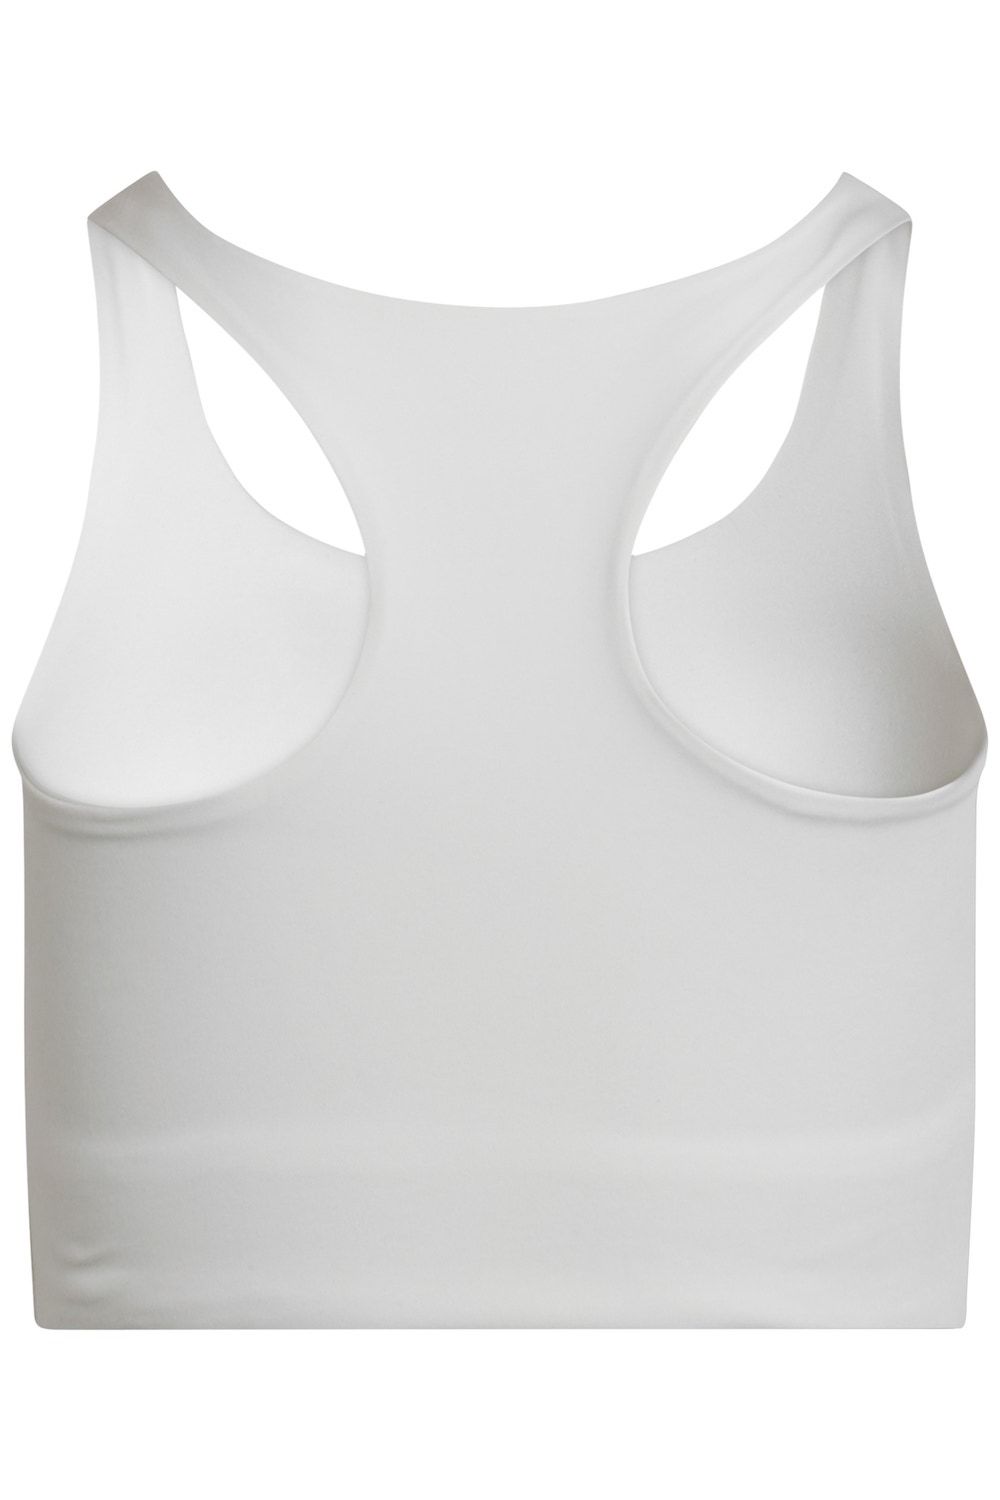 Girlfriend Collective Paloma Classic Sports Bra - Made from recycled plastic bottles Ivory Underwear